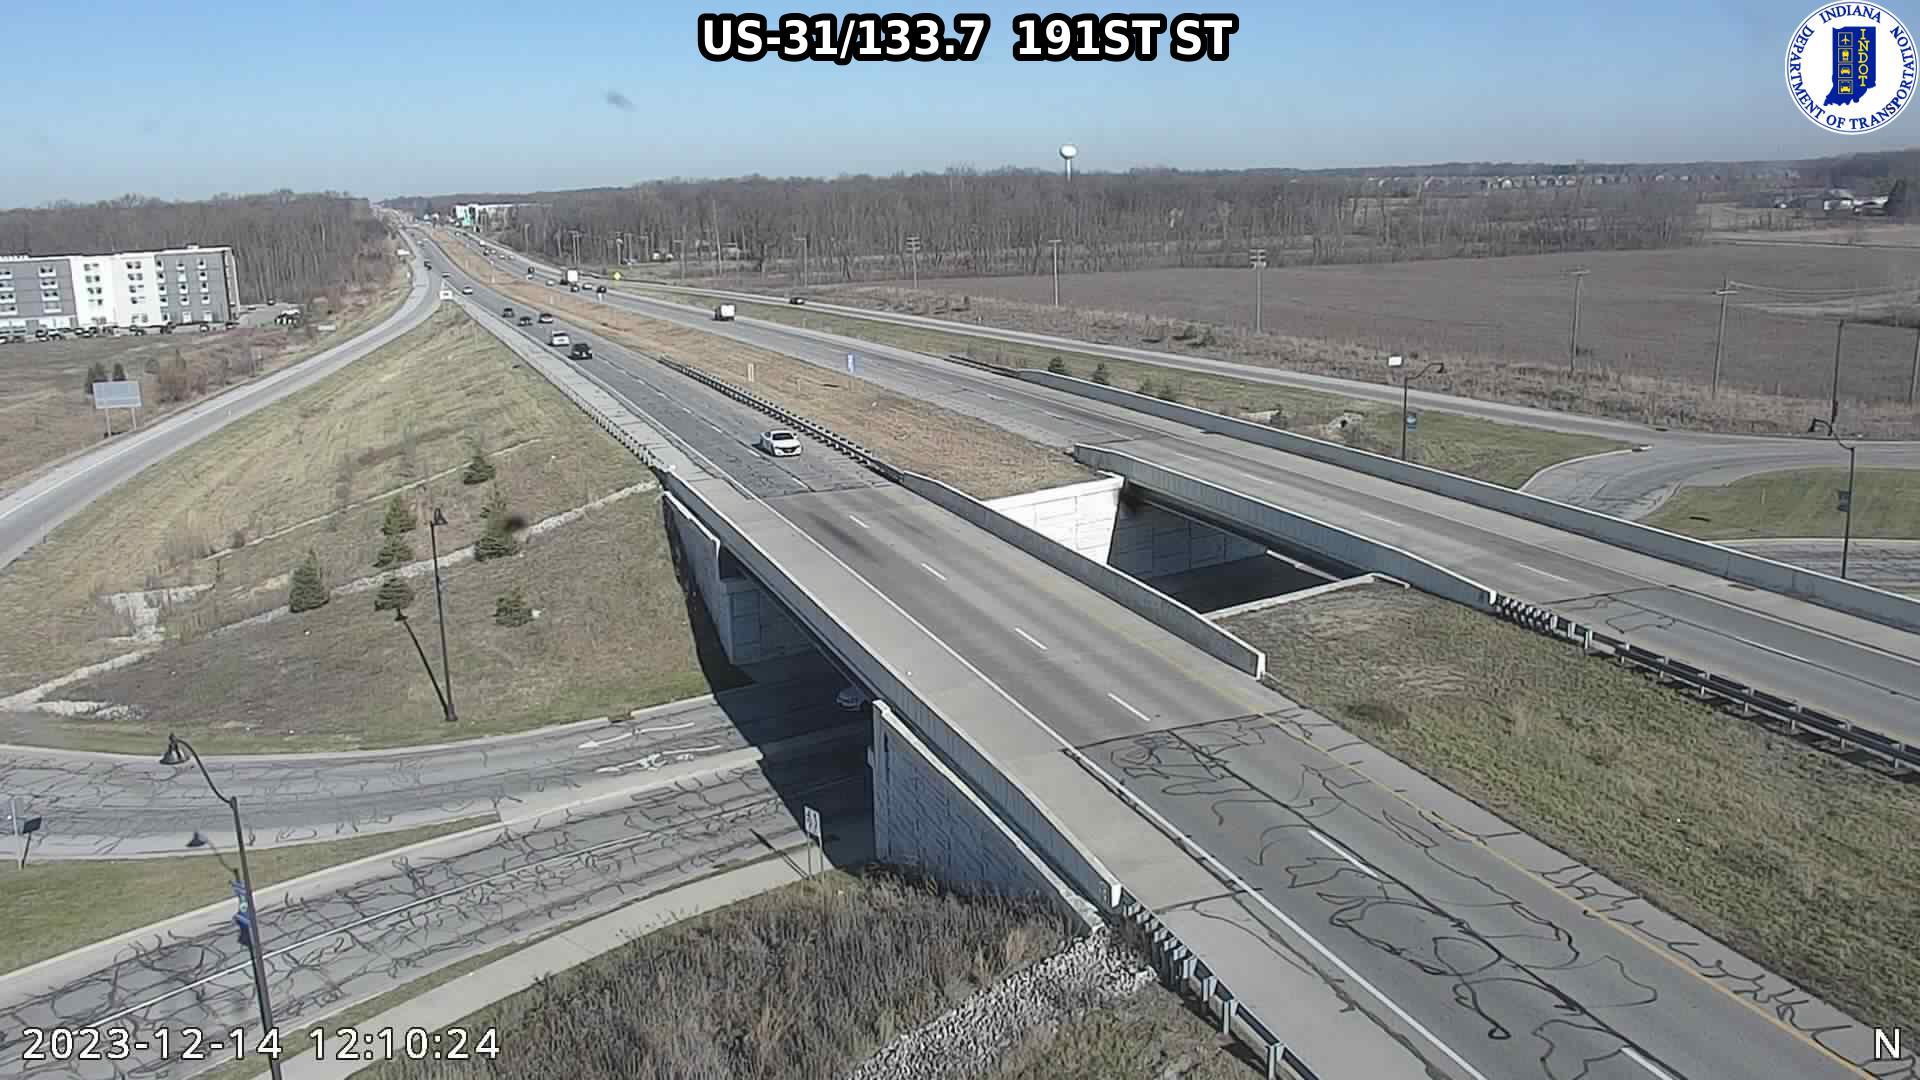 Traffic Cam Westfield: US-31: US-31/133.7 191ST ST Player